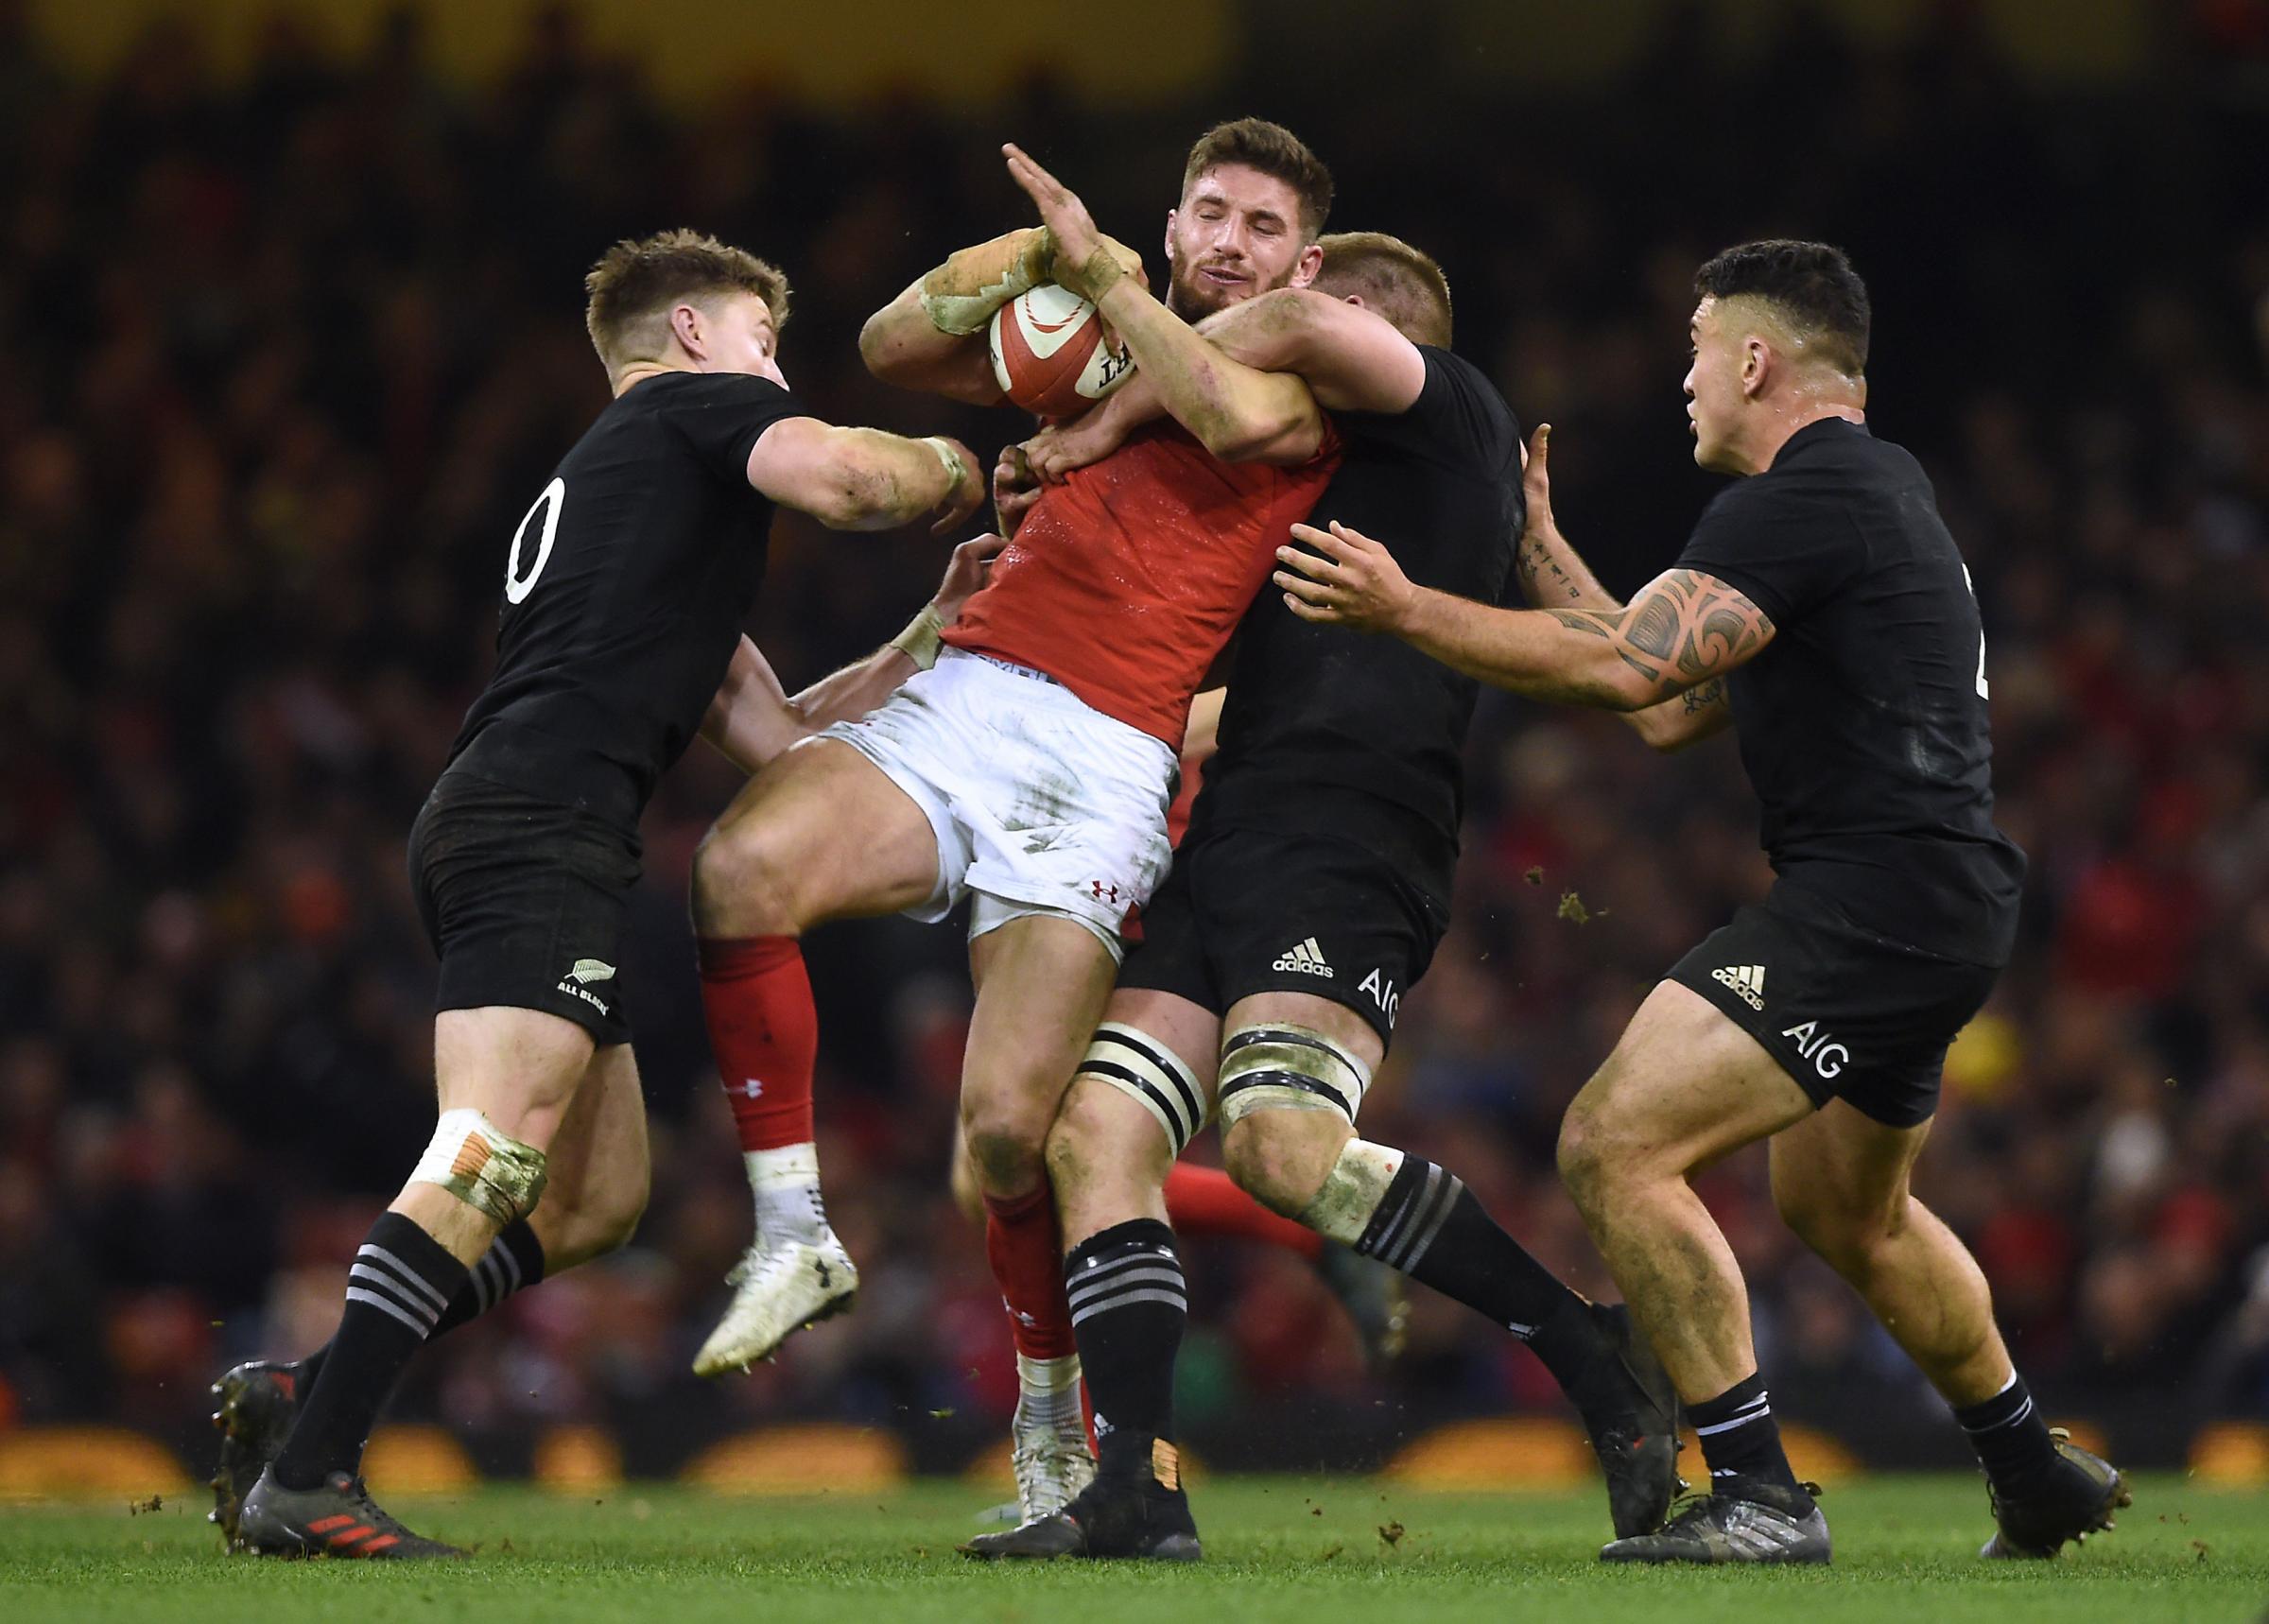 Wales Owen Williams is tackled by New Zealands Beauden Barrett, Sam Cane and Codie Taylor during the Autumn International at the Principality Stadium, Cardiff. PRESS ASSOCIATION Photo. Picture date: Saturday November 25, 2017. See PA story RUGBYU